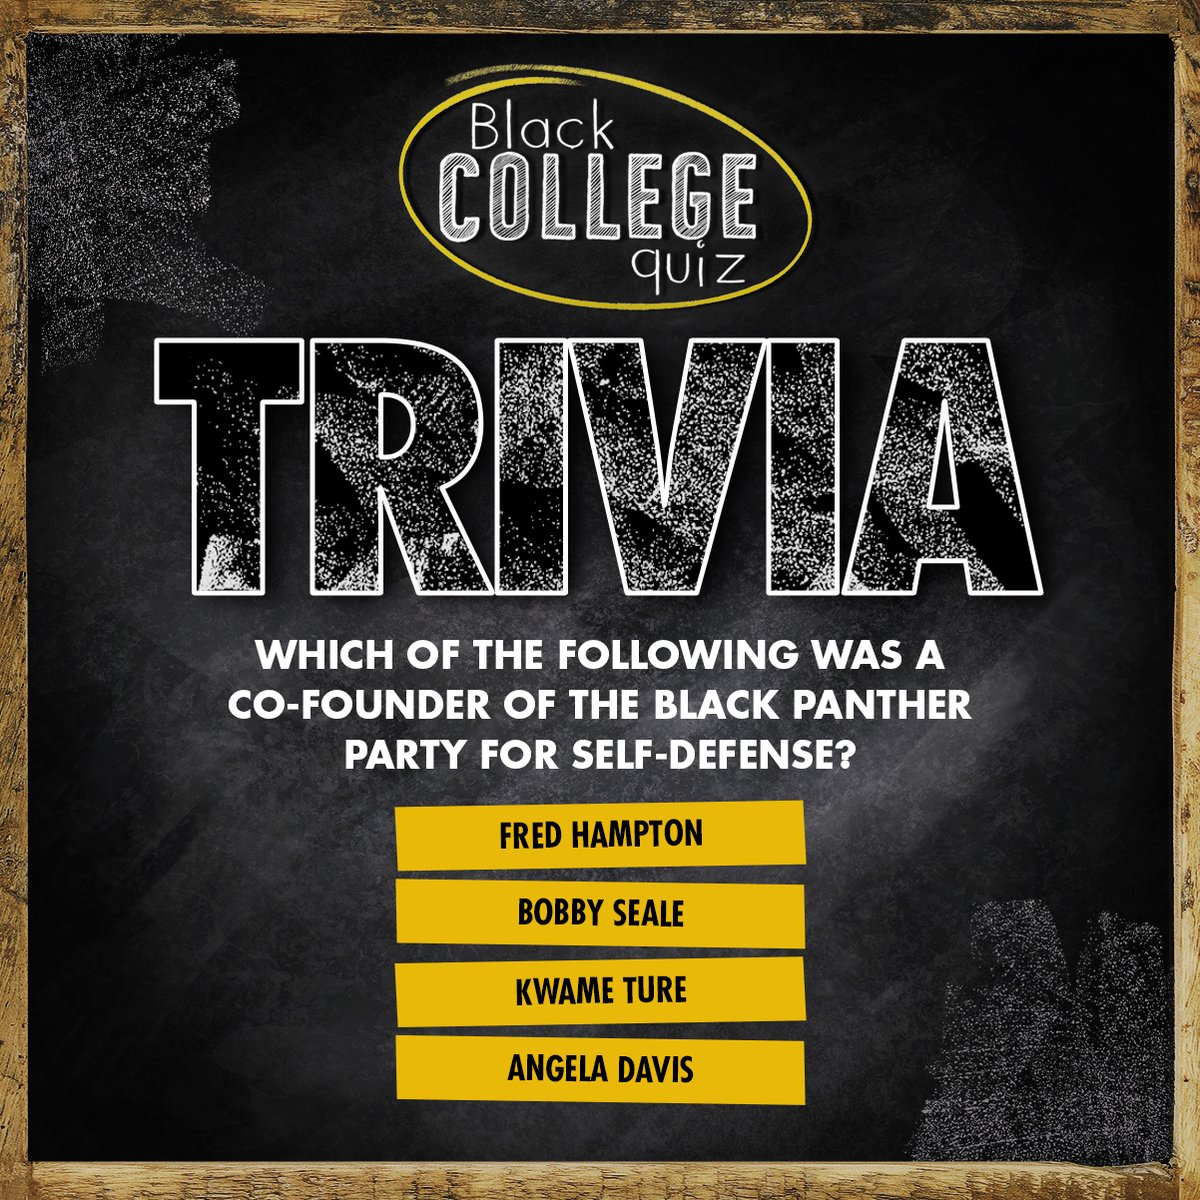 Here's a @blkcollegequiz trivia question: WHICH OF THE FOLLOWING WAS A CO-FOUNDER OF THE BLACK PANTHER PARTY FOR SELF-DEFENSE? Drop your guesses below! 💭✍️ Don't forget to come back on Monday for the big reveal! #BlackCollegeQuiz #TriviaChallenge #BrainyVibes